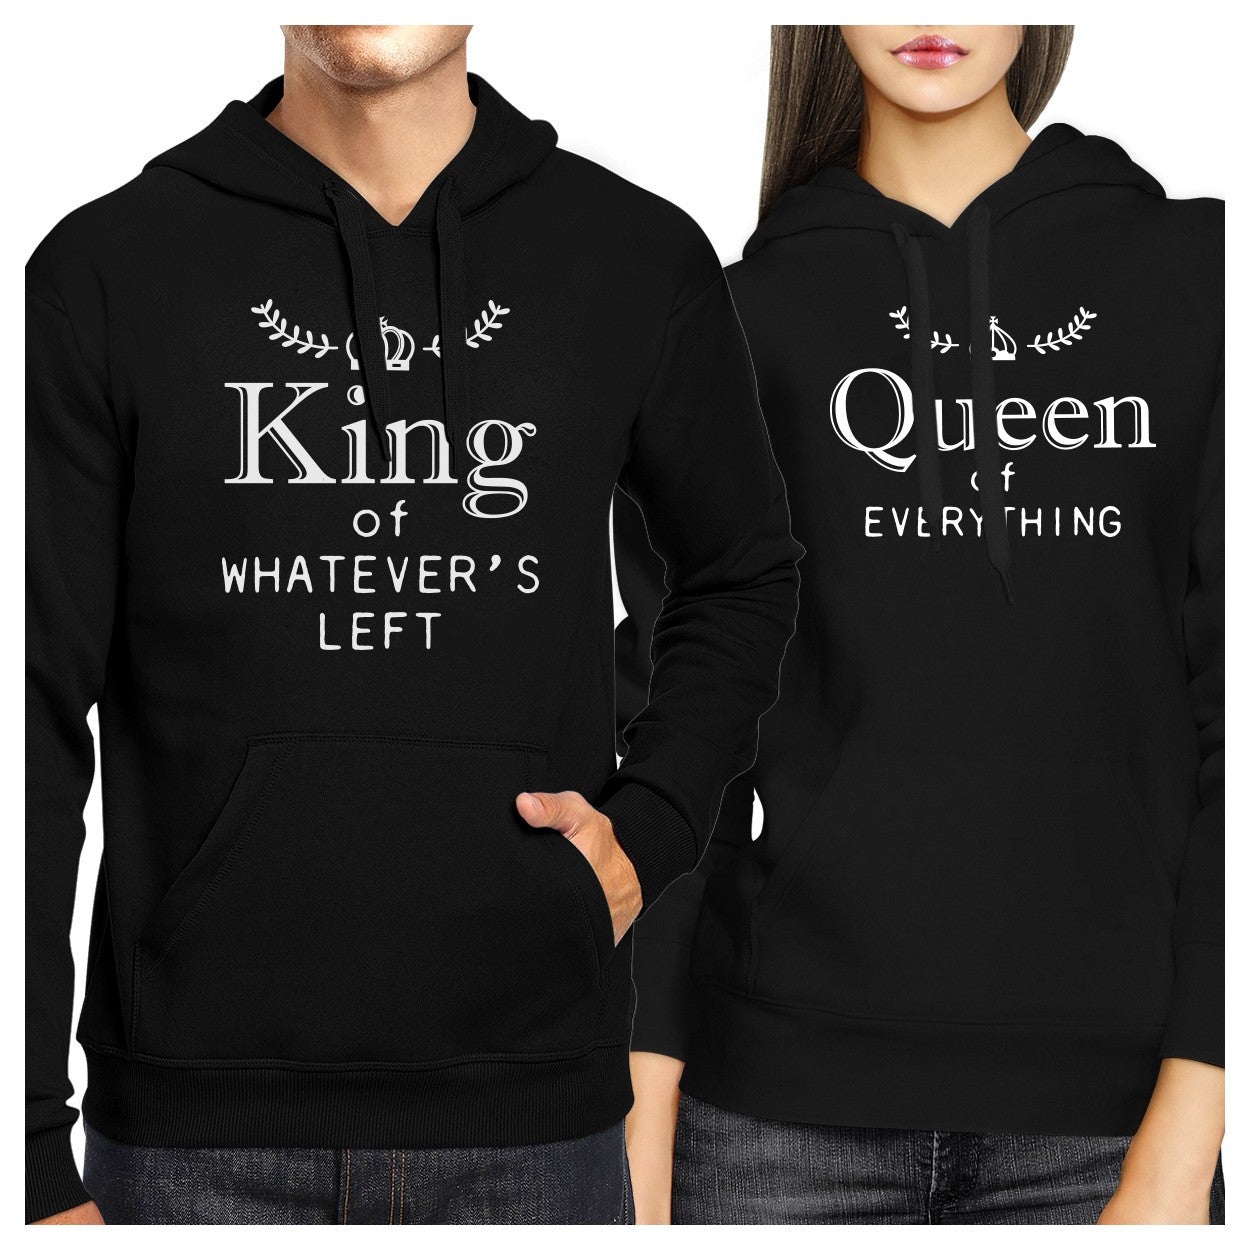 King and Queen of Everything Couple Hoodies Anniversary Gifts Ideas - Men- Small/ Women- X-Large